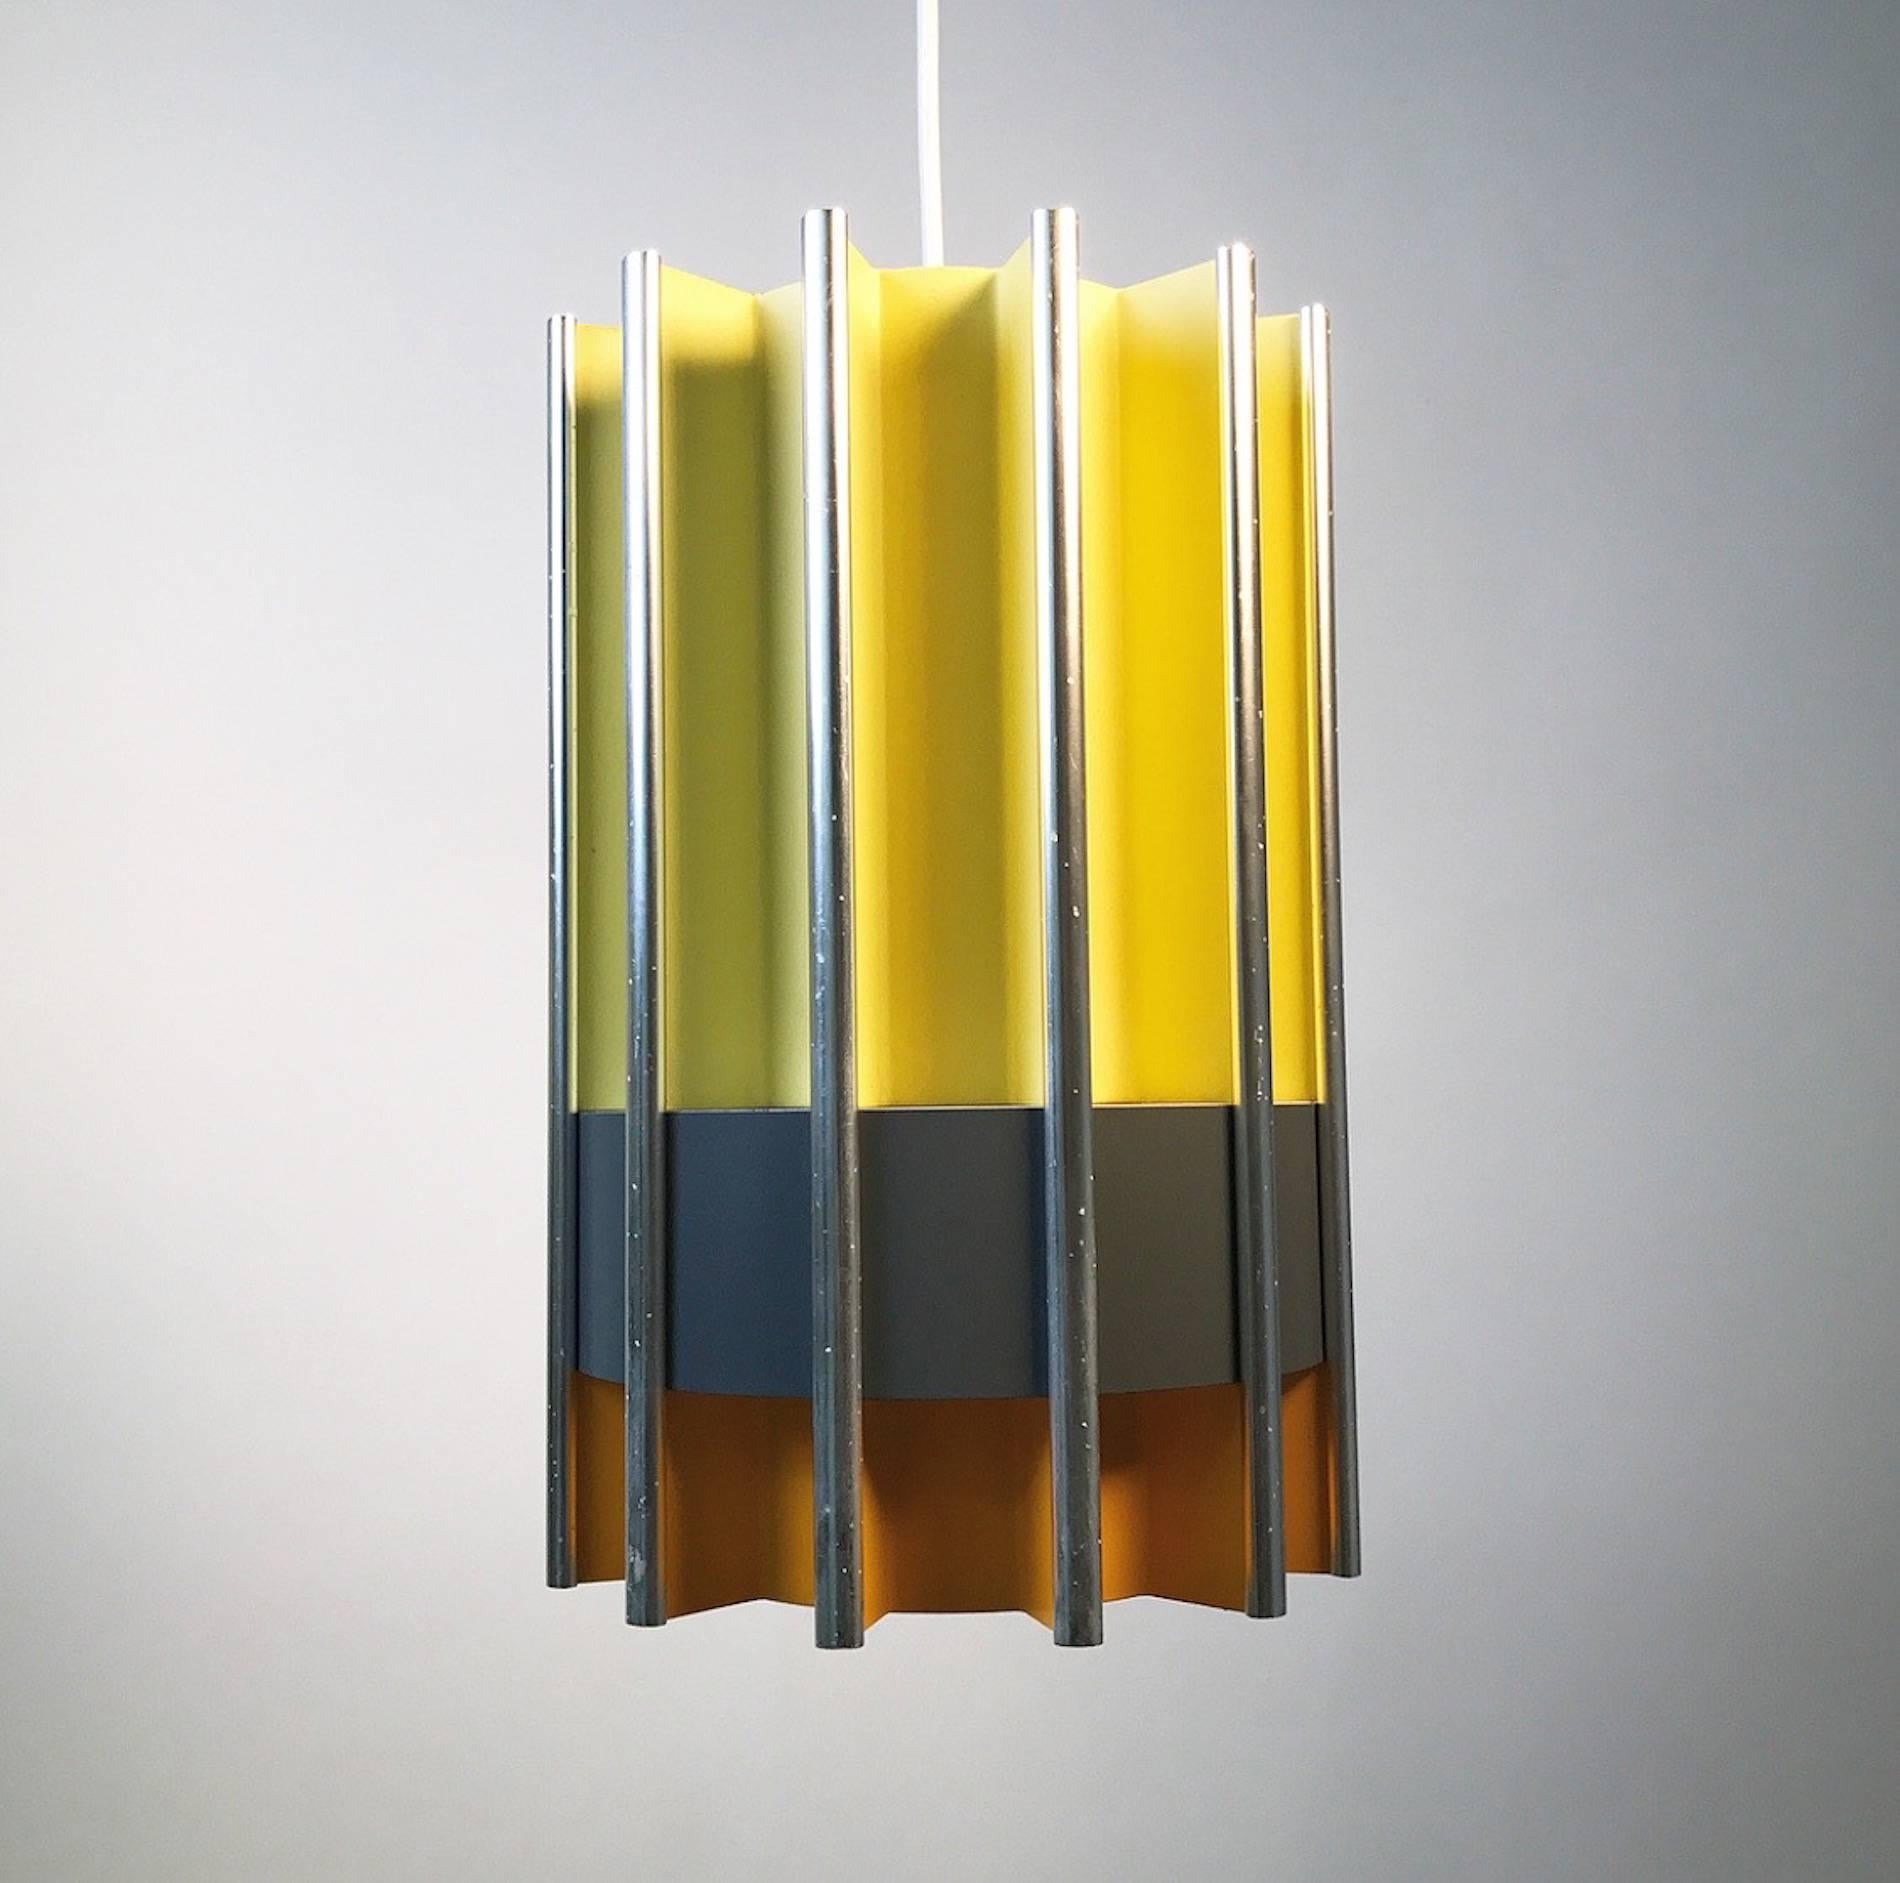 The rare Pantre by Bent Karlby for Lyfa, mid-1960s, Denmark. 

Sections of orange and yellow lacquered parts divided with a grey belt of lighting shining through the sides. Light is also distributed up and down wards.

All the pieces are put